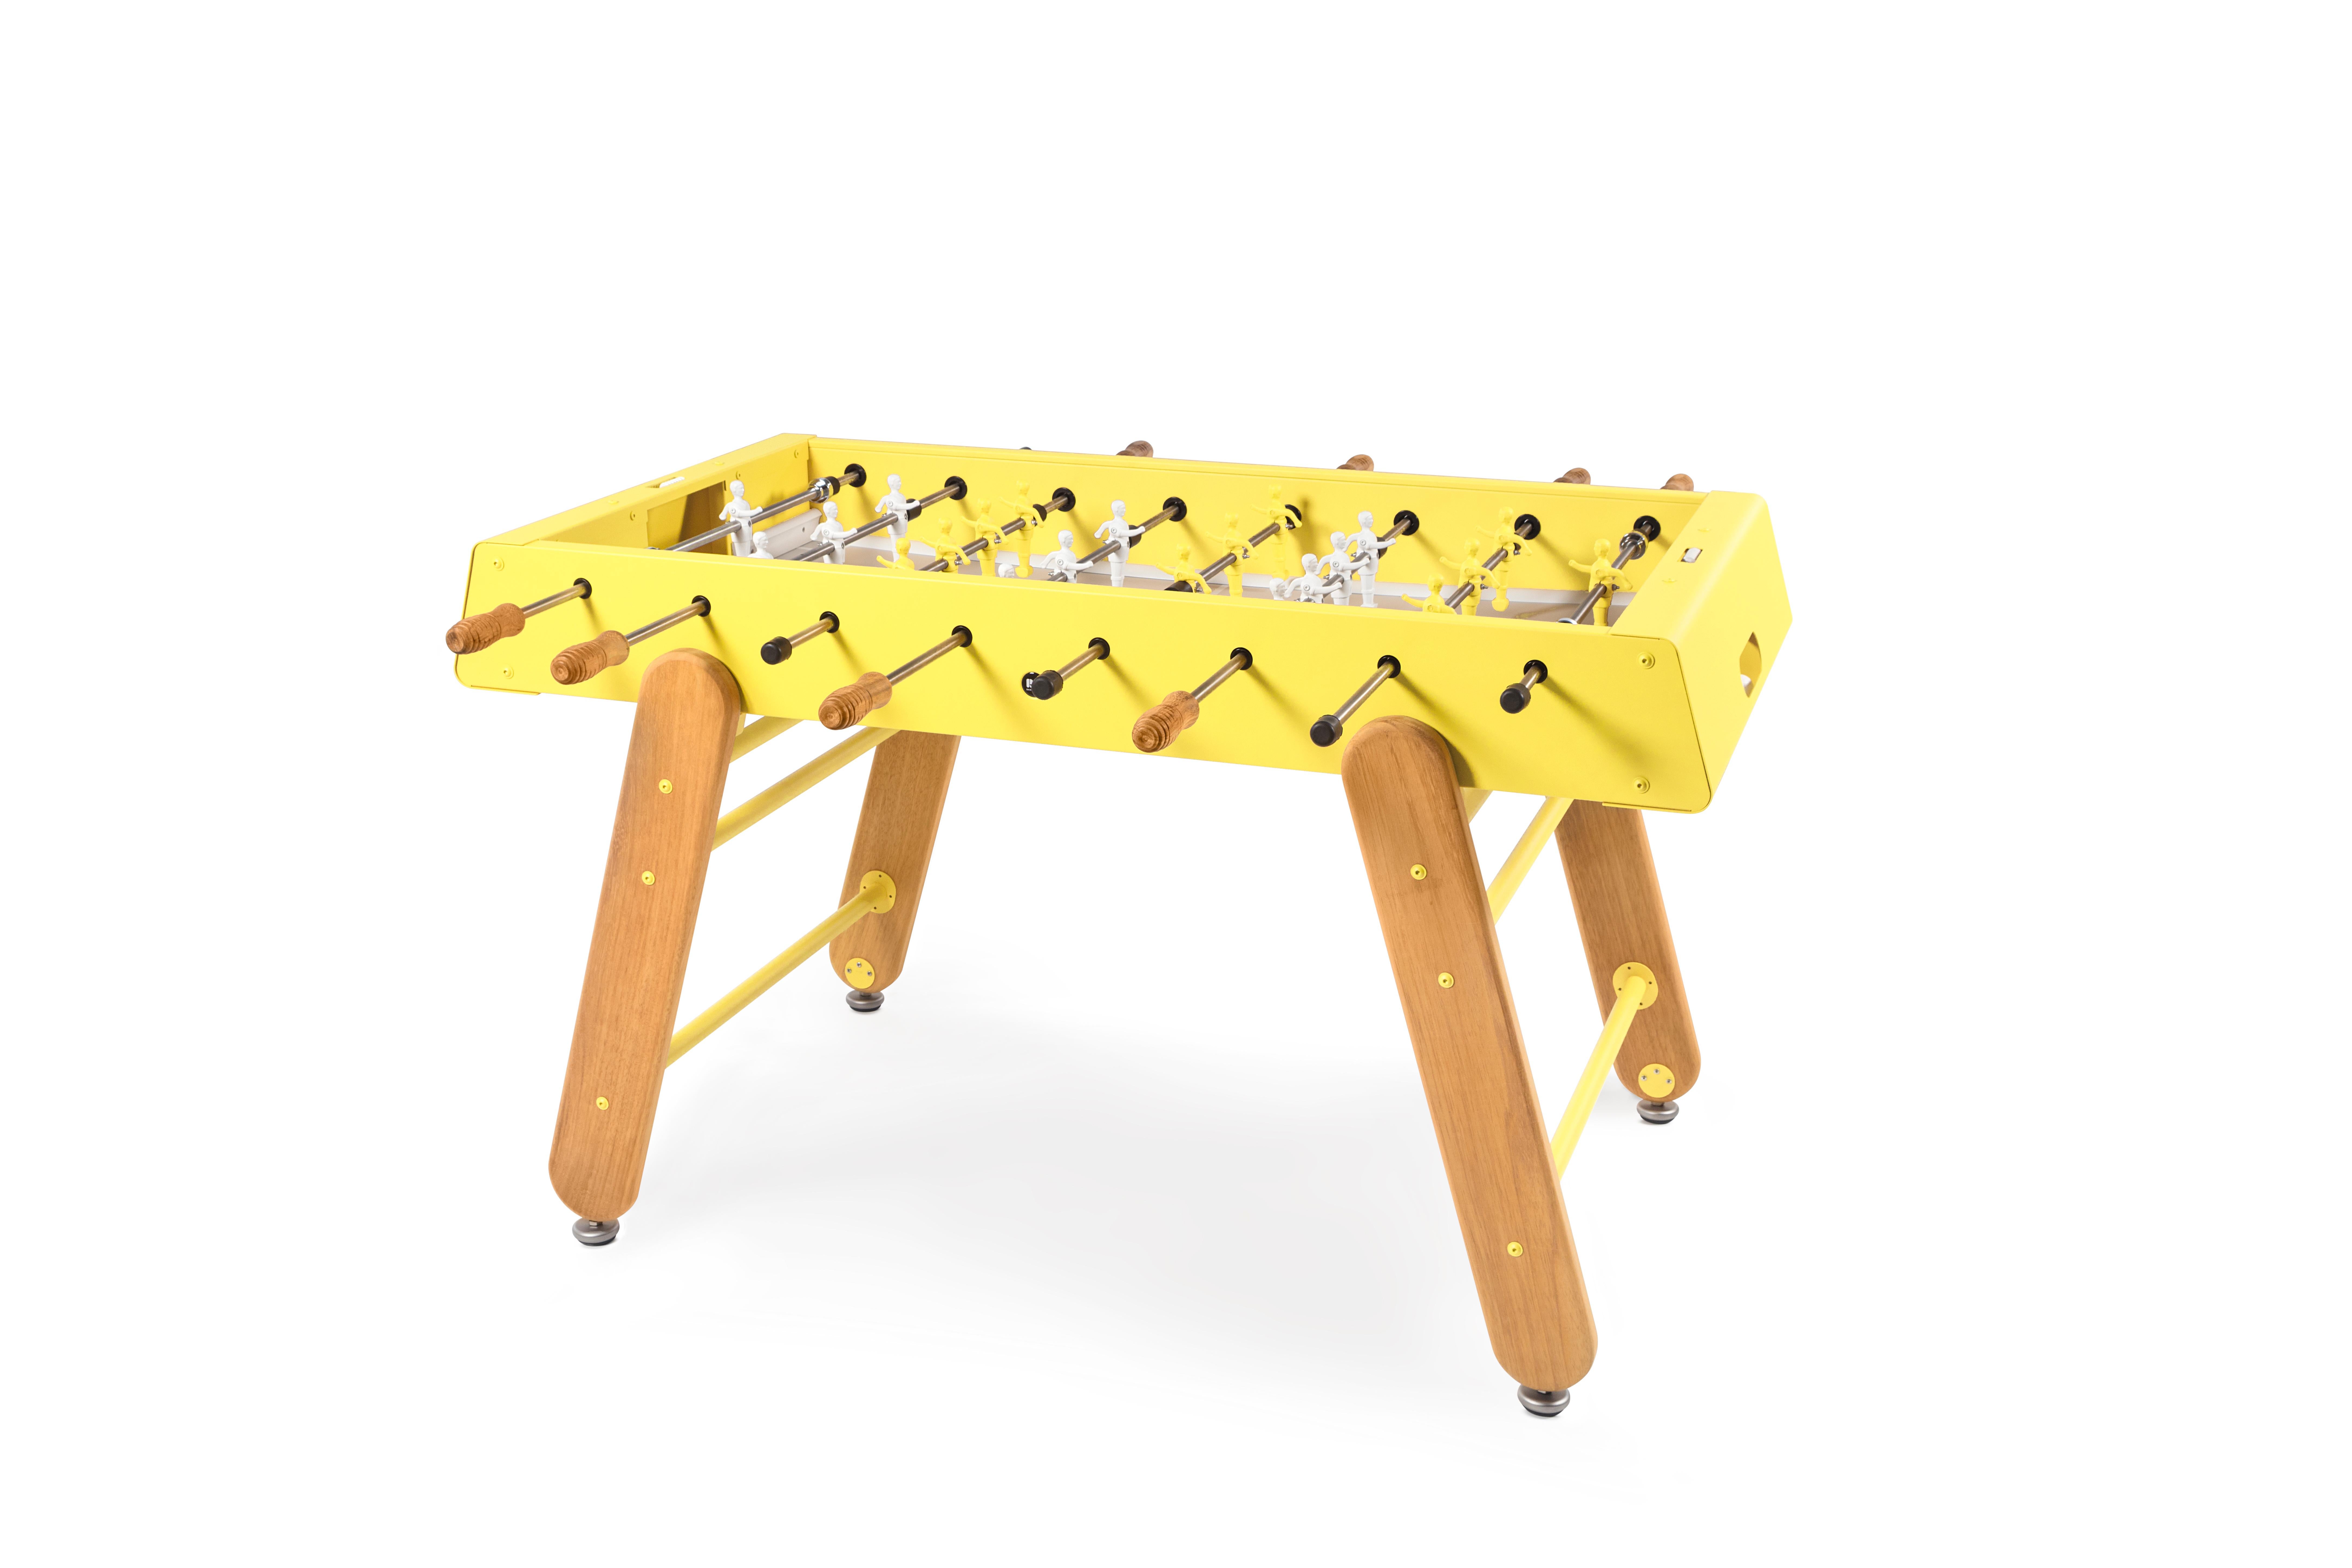 The RS4 Home football table has been designed to enjoy at home, with family and friends. For all ages. For sharing. For any moment. For doing it yourself and then, when the match starts, you set the rules of the game. This is a full sized foosball